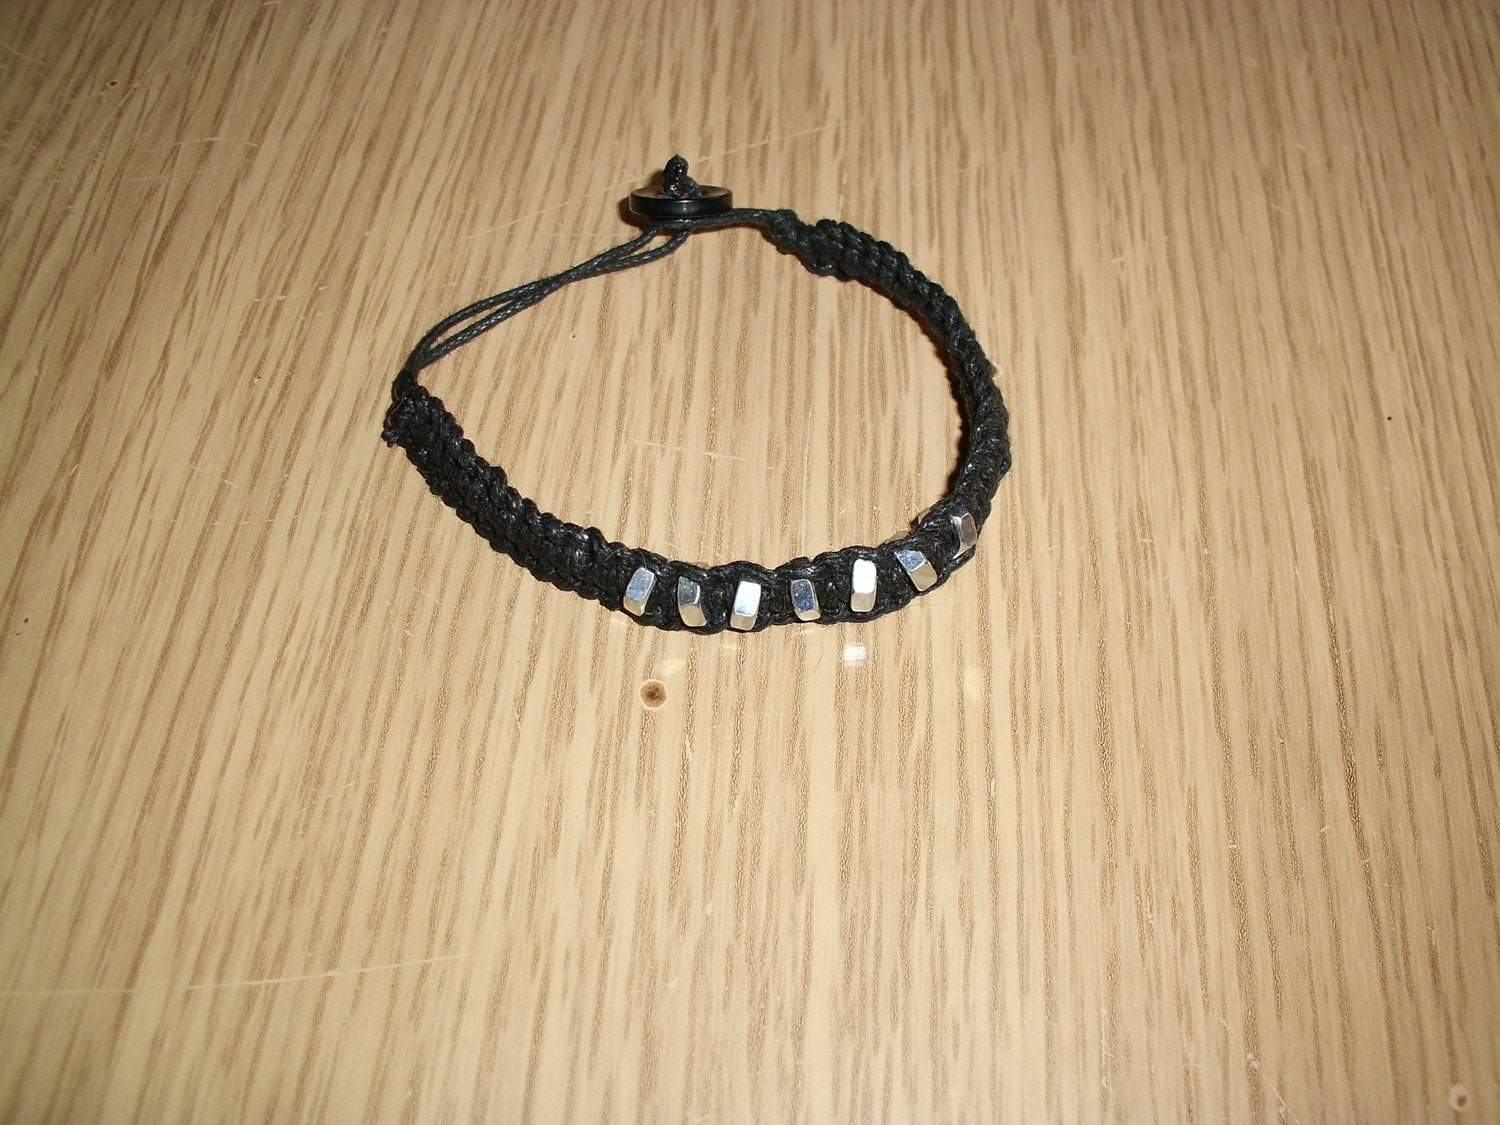 Black Shamballa Style Bracelet with silver hex nuts